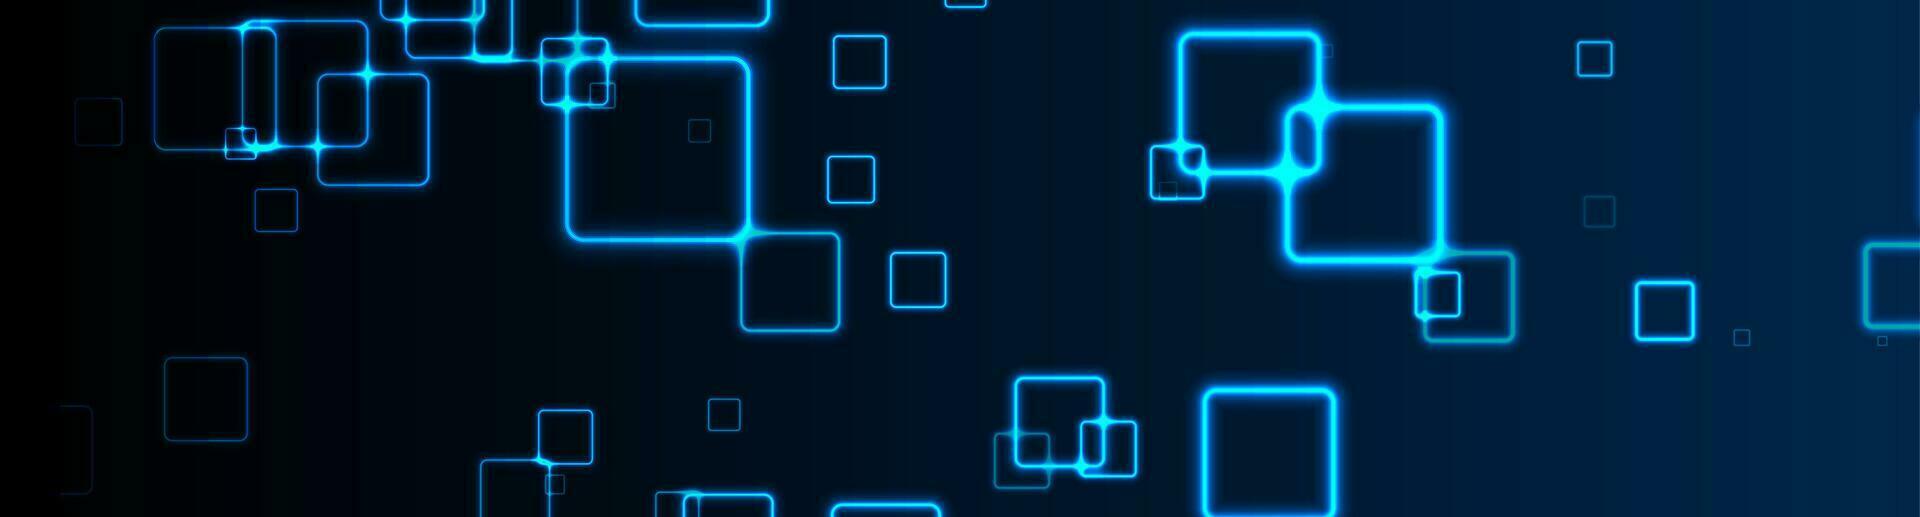 Bright blue neon geometric squares abstract background vector